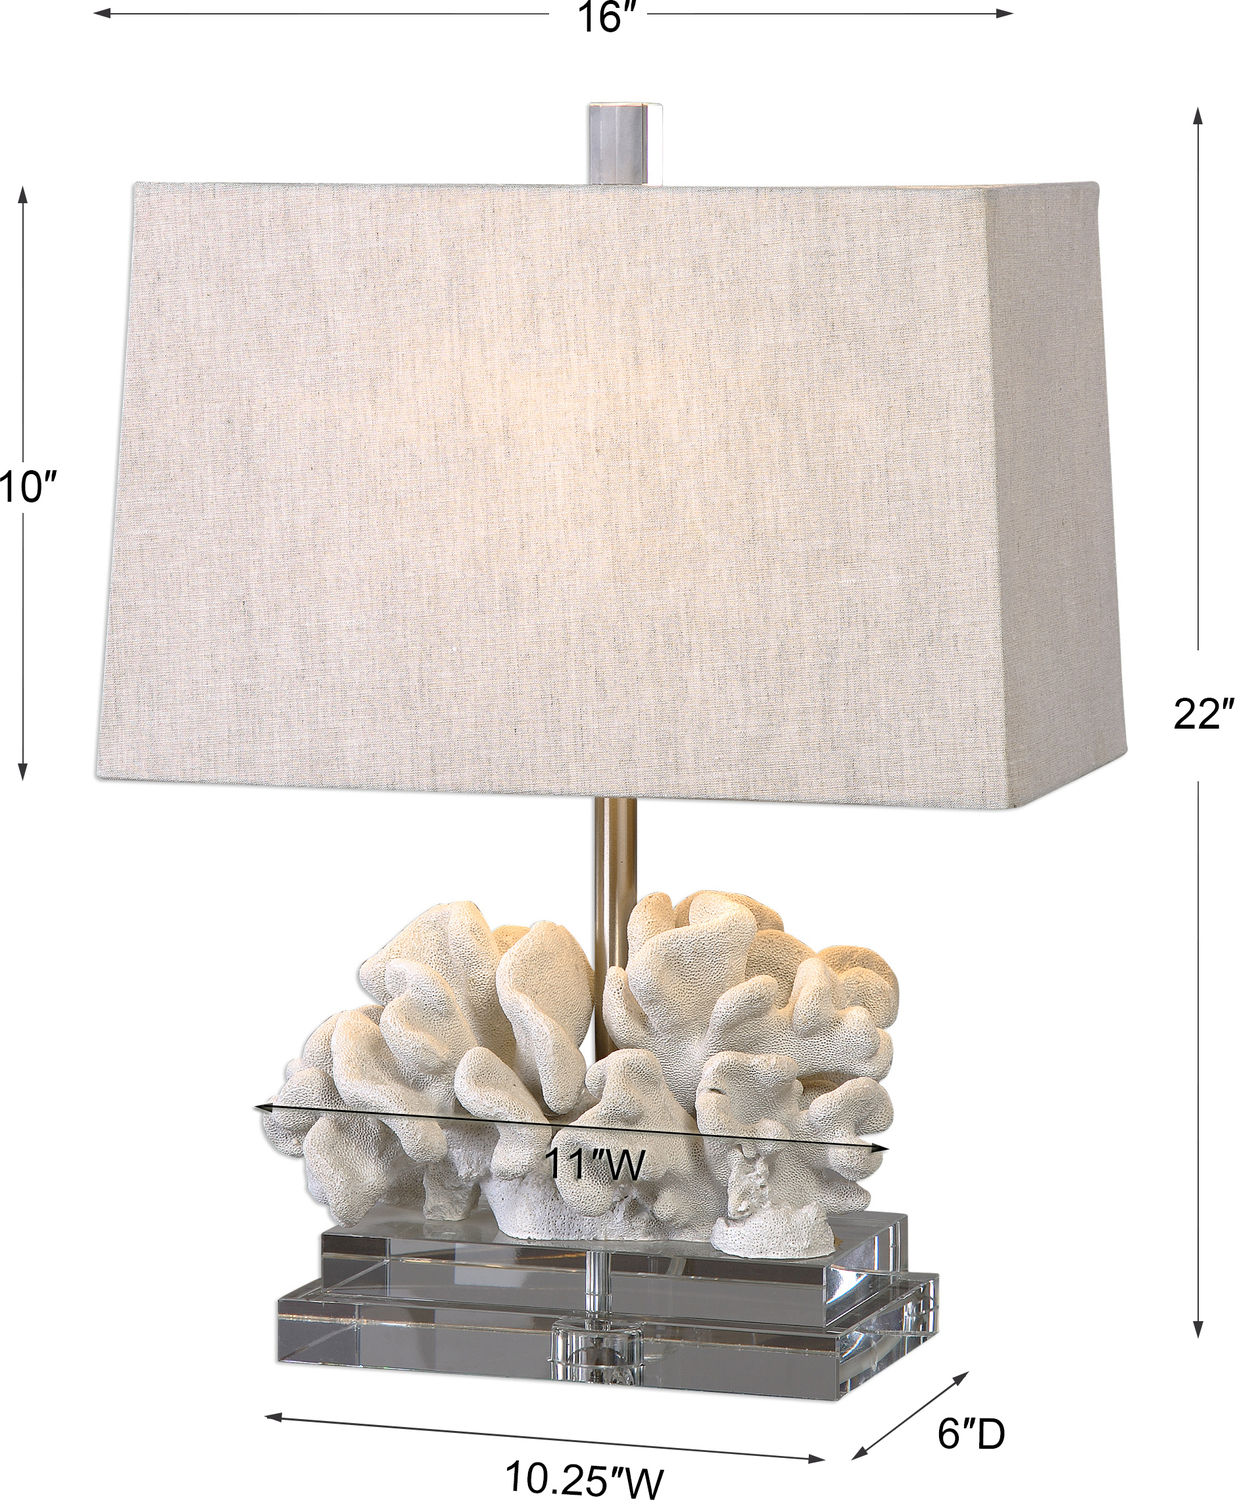 cylinder desk lamp Uttermost Coral Sculpture Table Lamp Taupe-ivory Coral Sculpture Accented With Thick Crystal Details. NA